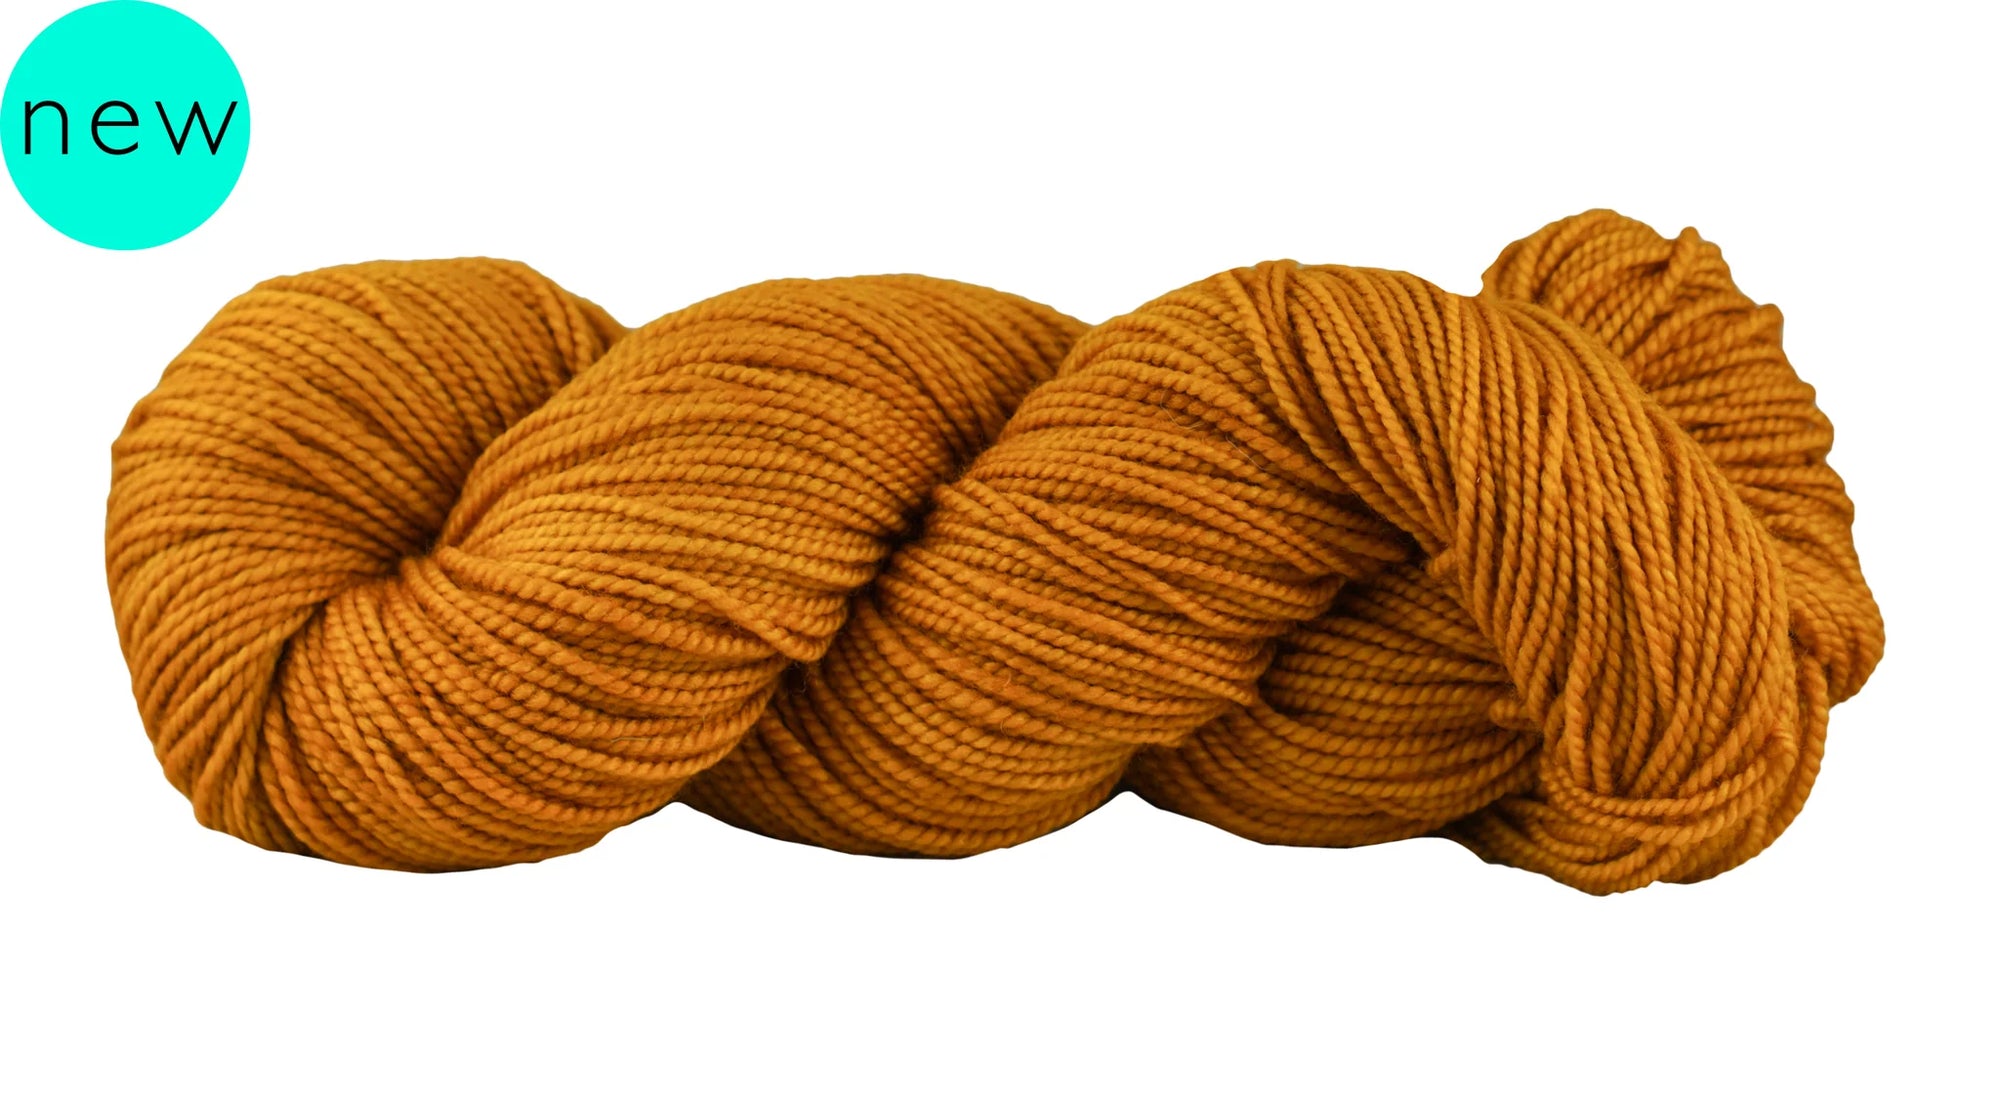 Dry Spun 2 Ply Linen Cotton Blend Yarn, For Weaving, Count: 30 at